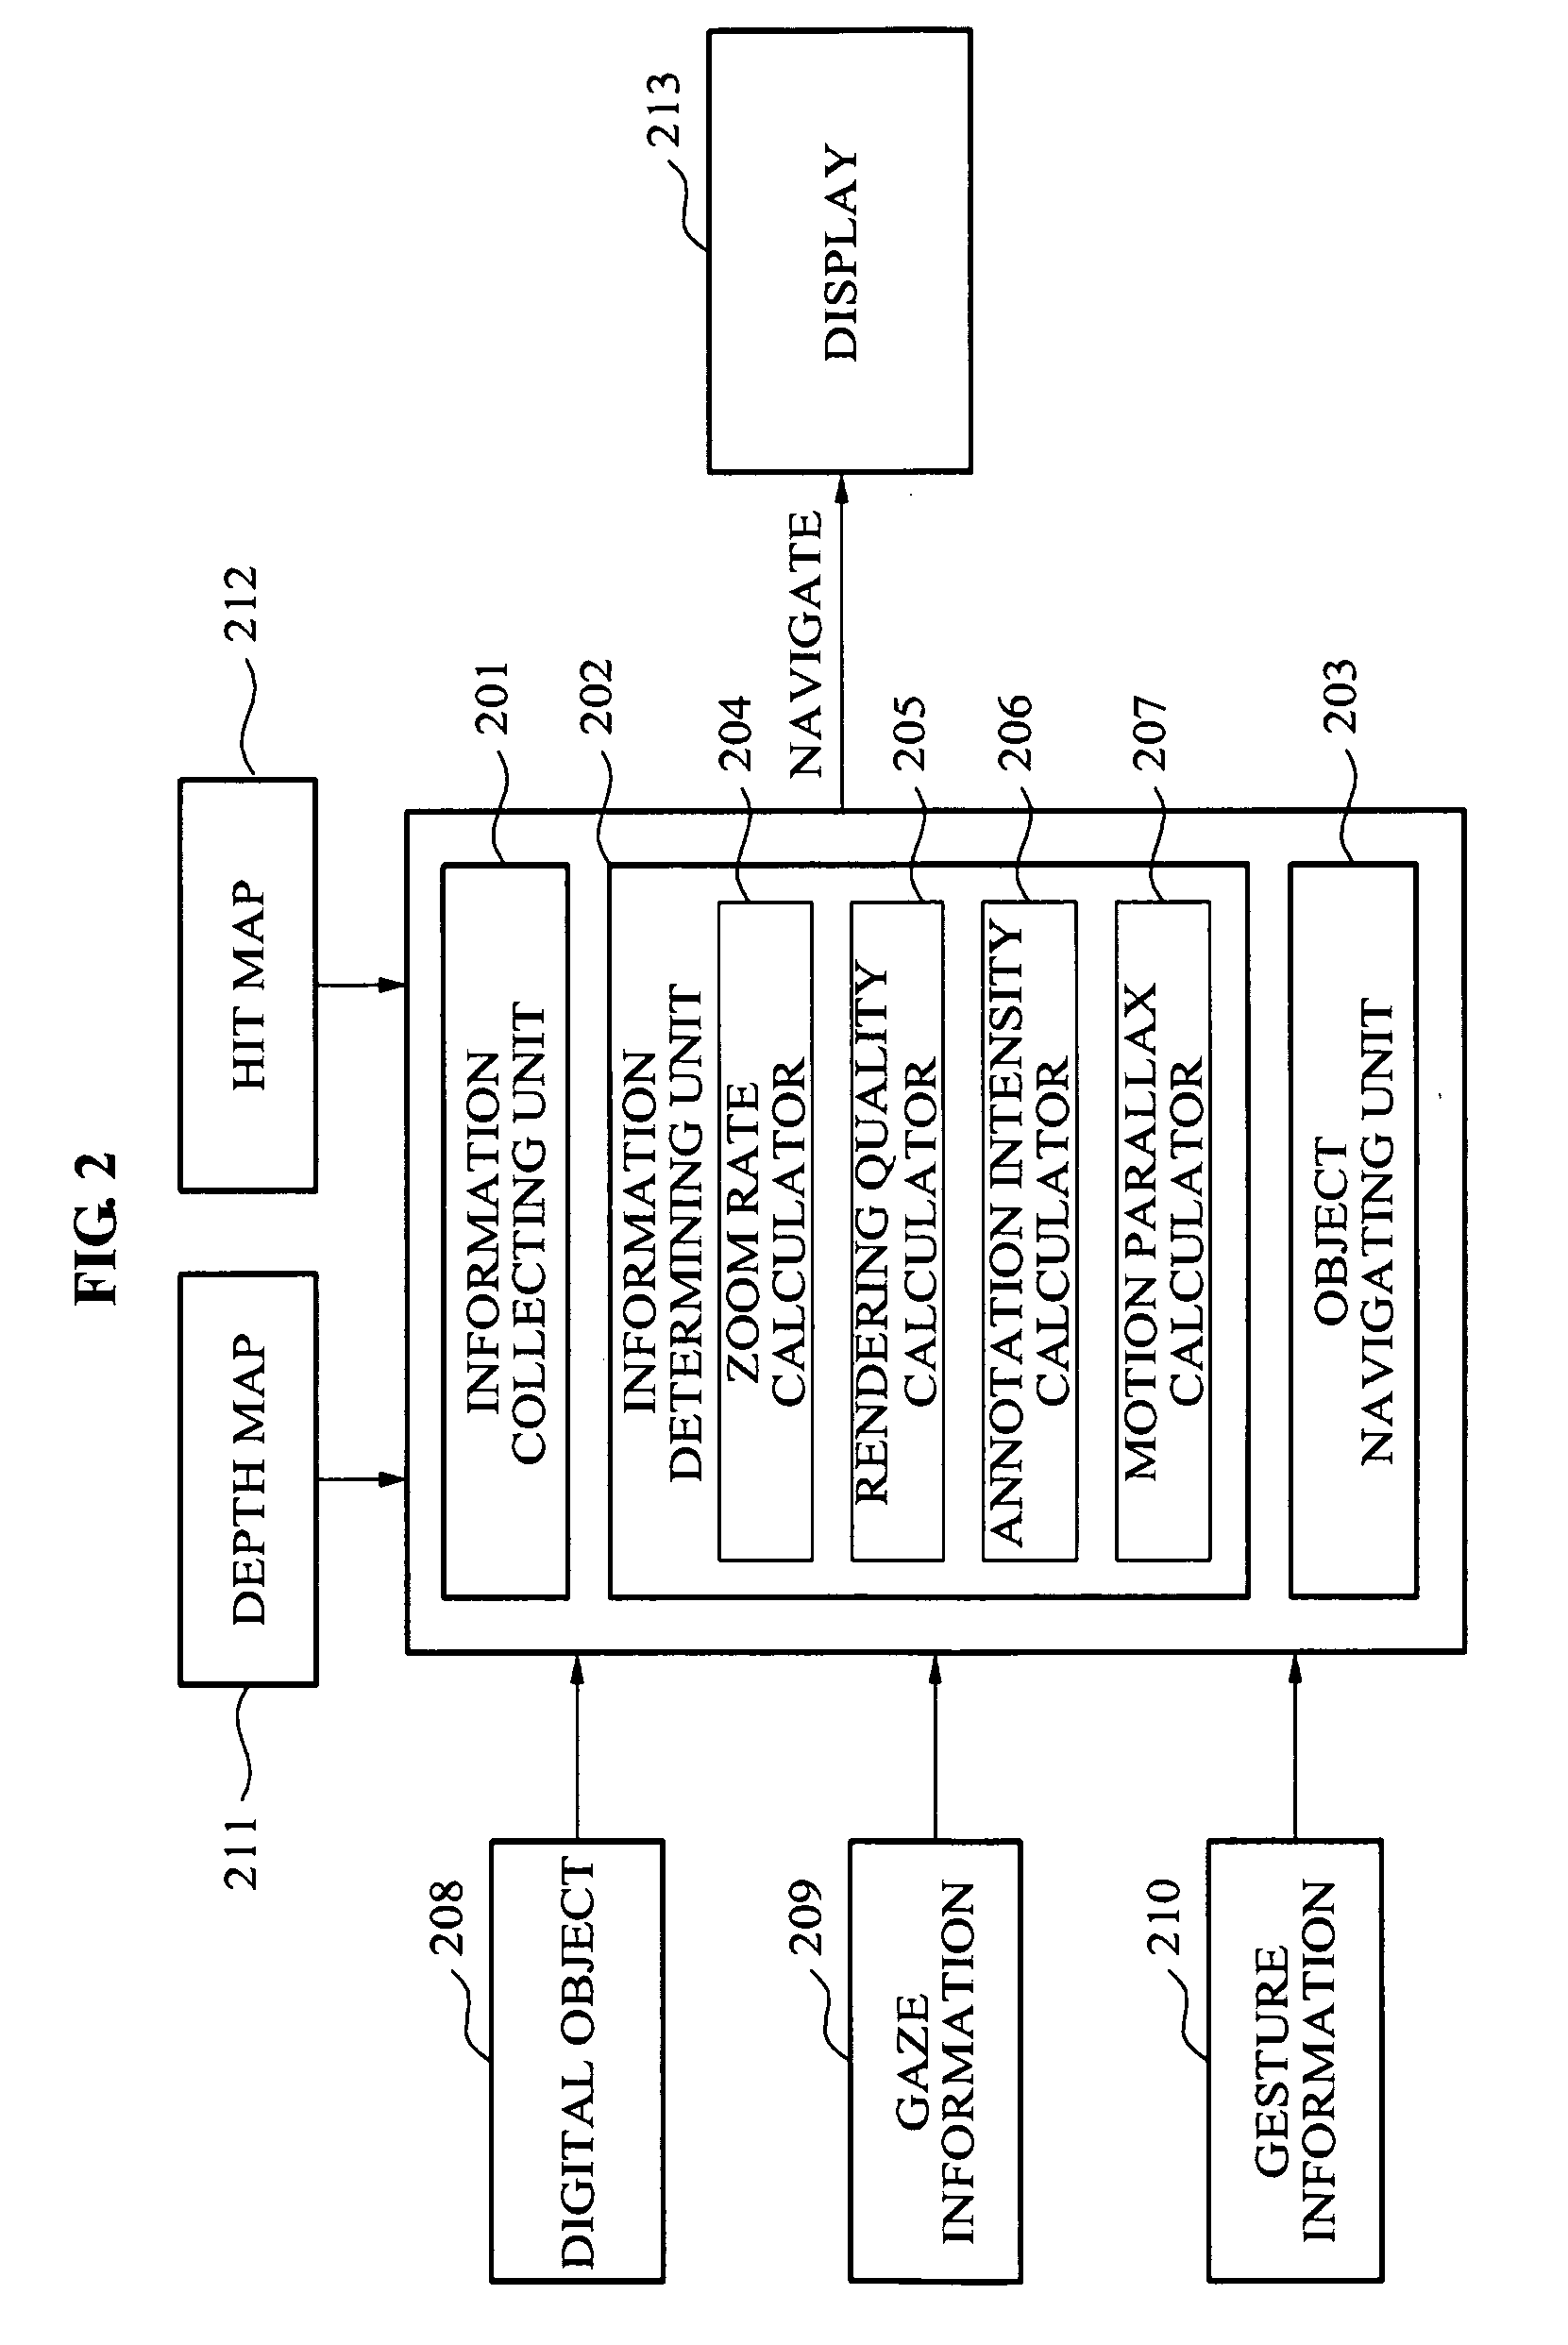 Apparatus and method for navigation in digital object using gaze information of user